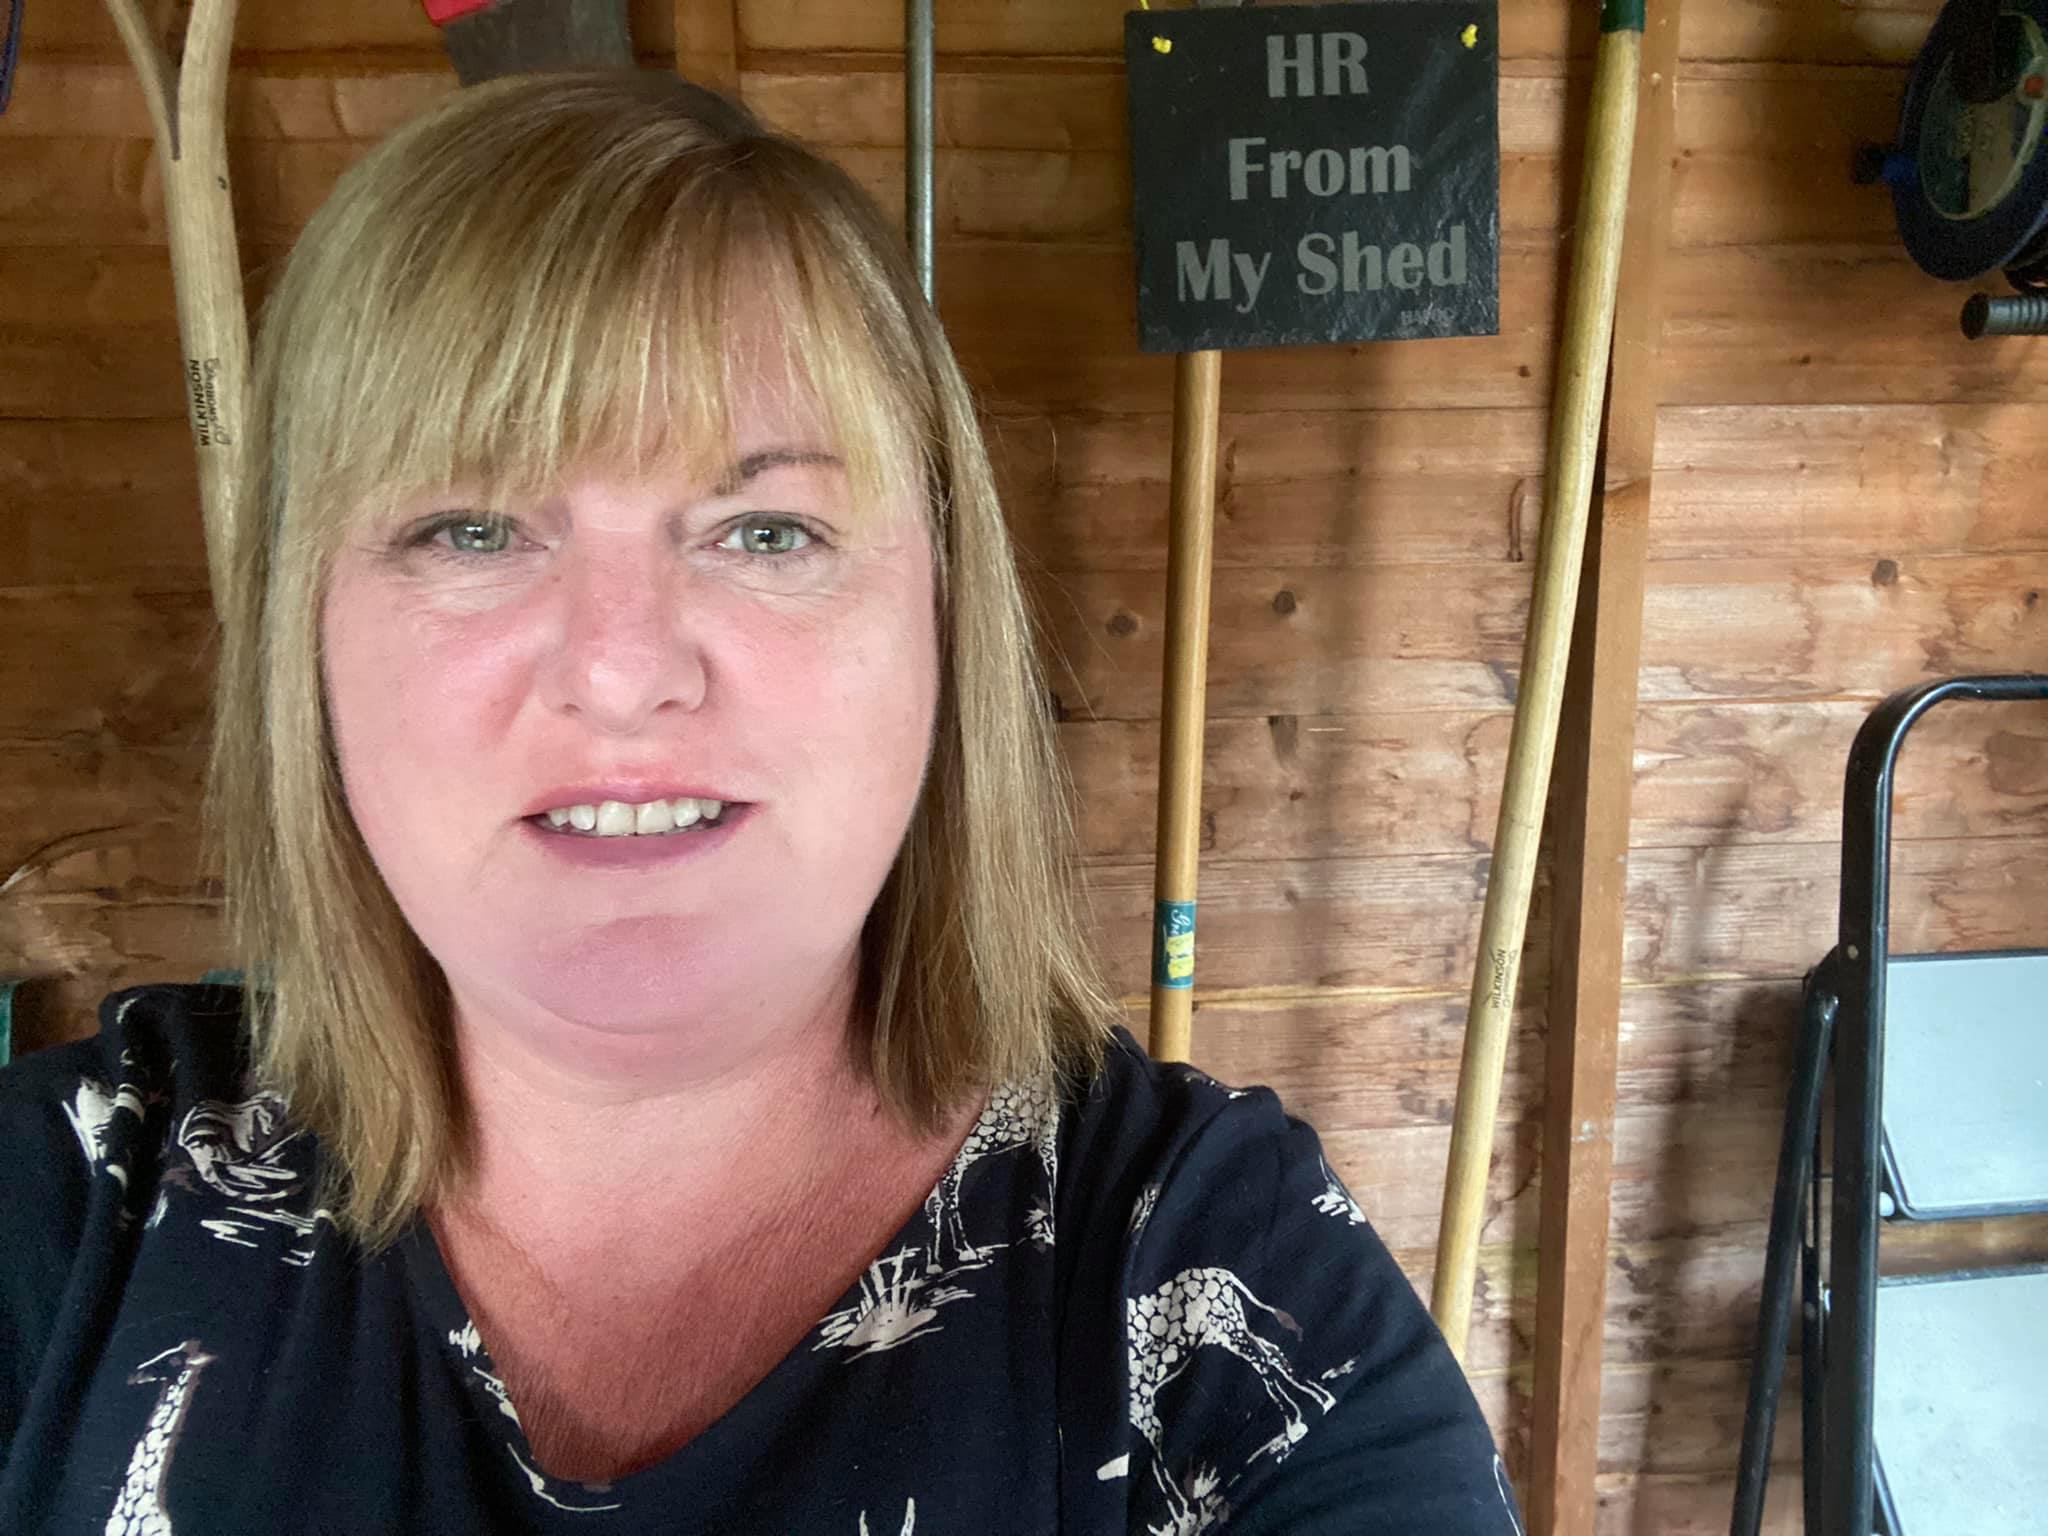 The Welsh HR Consultant Helping Businesses from her Garden Shed